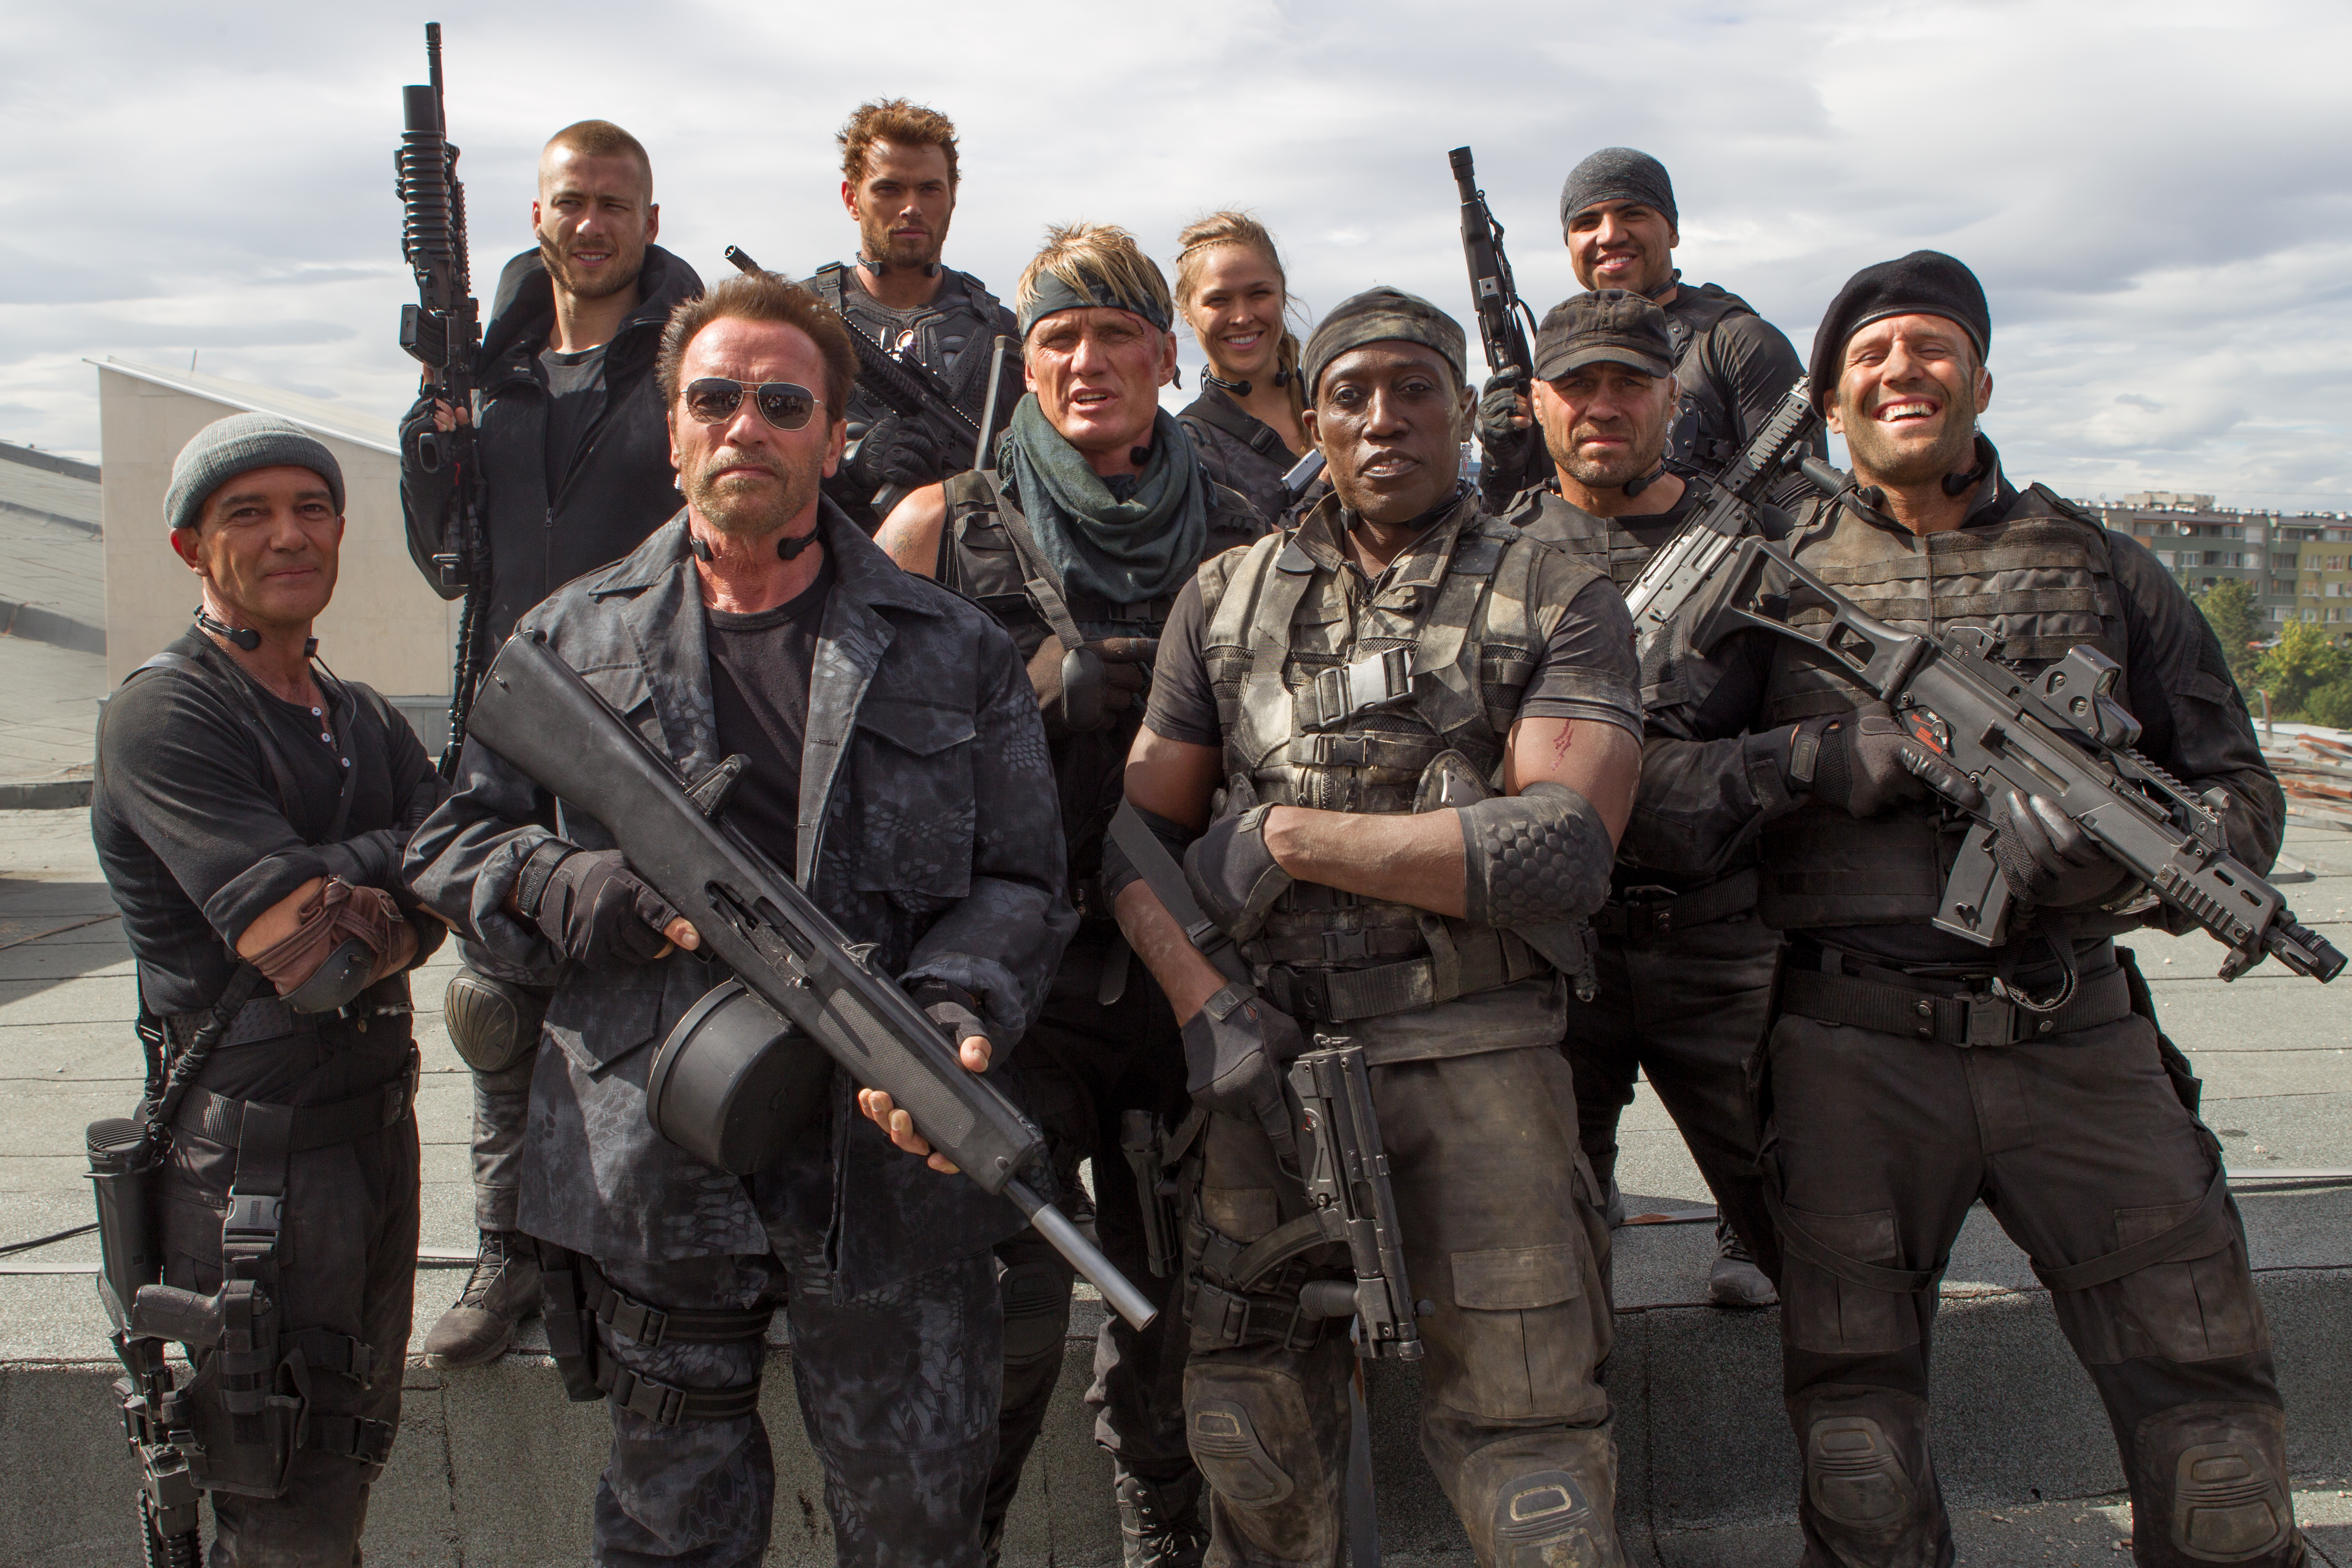 wesley snipes, the expendables 3, movie, antonio banderas, arnold schwarzenegger, dolph lundgren, glen powell, jason statham, kellan lutz, randy couture, terry crews, victor ortiz, the expendables iphone wallpaper